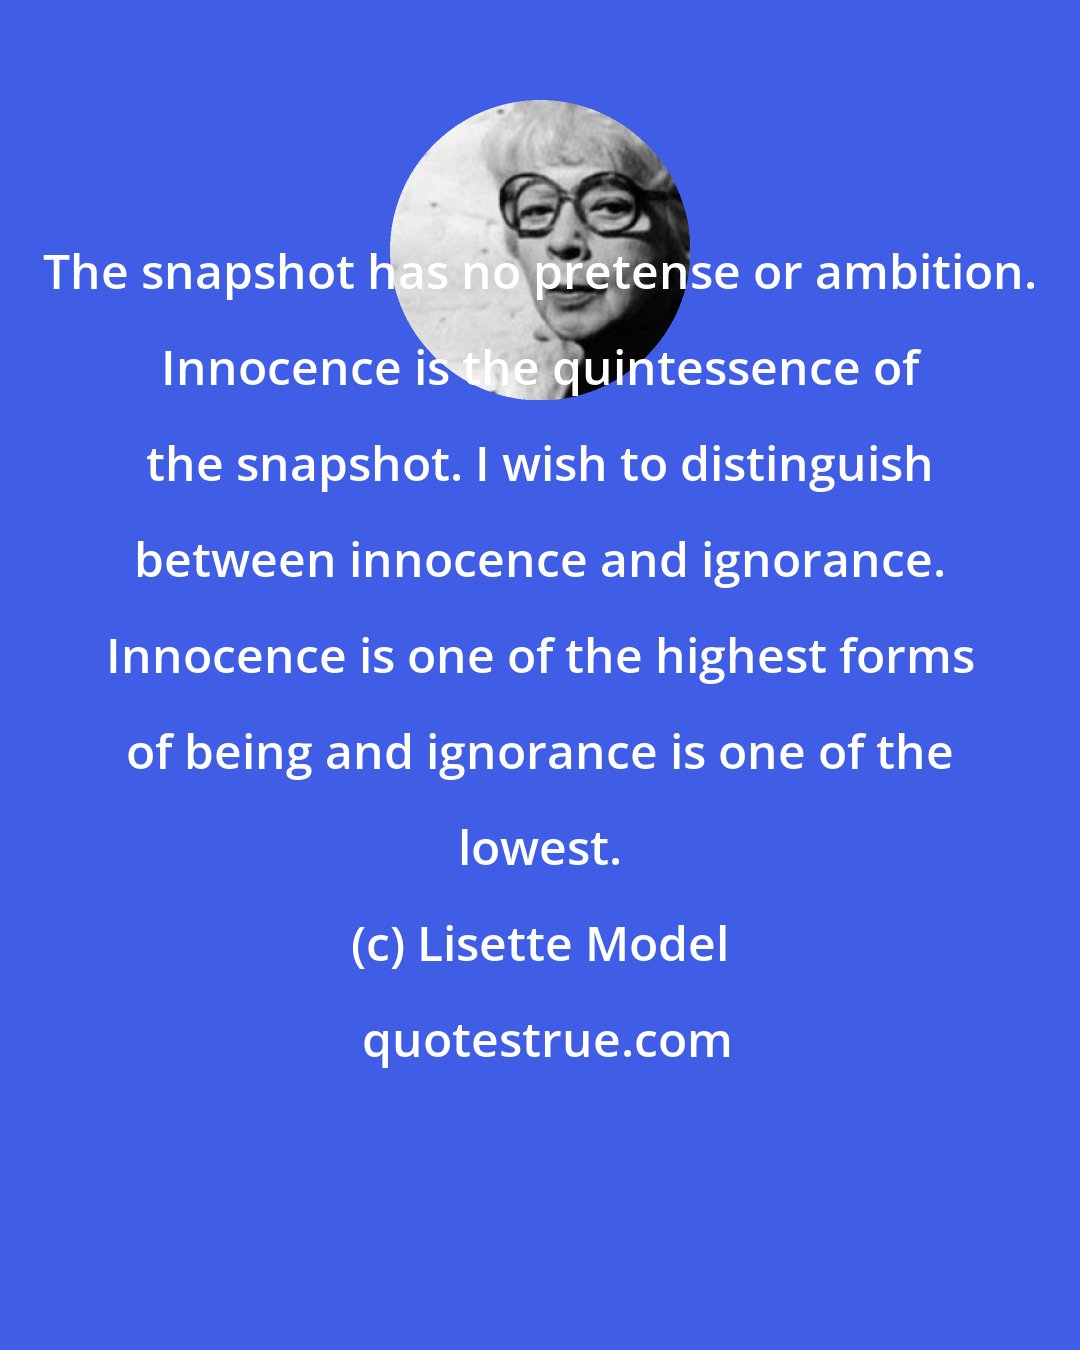 Lisette Model: The snapshot has no pretense or ambition. Innocence is the quintessence of the snapshot. I wish to distinguish between innocence and ignorance. Innocence is one of the highest forms of being and ignorance is one of the lowest.